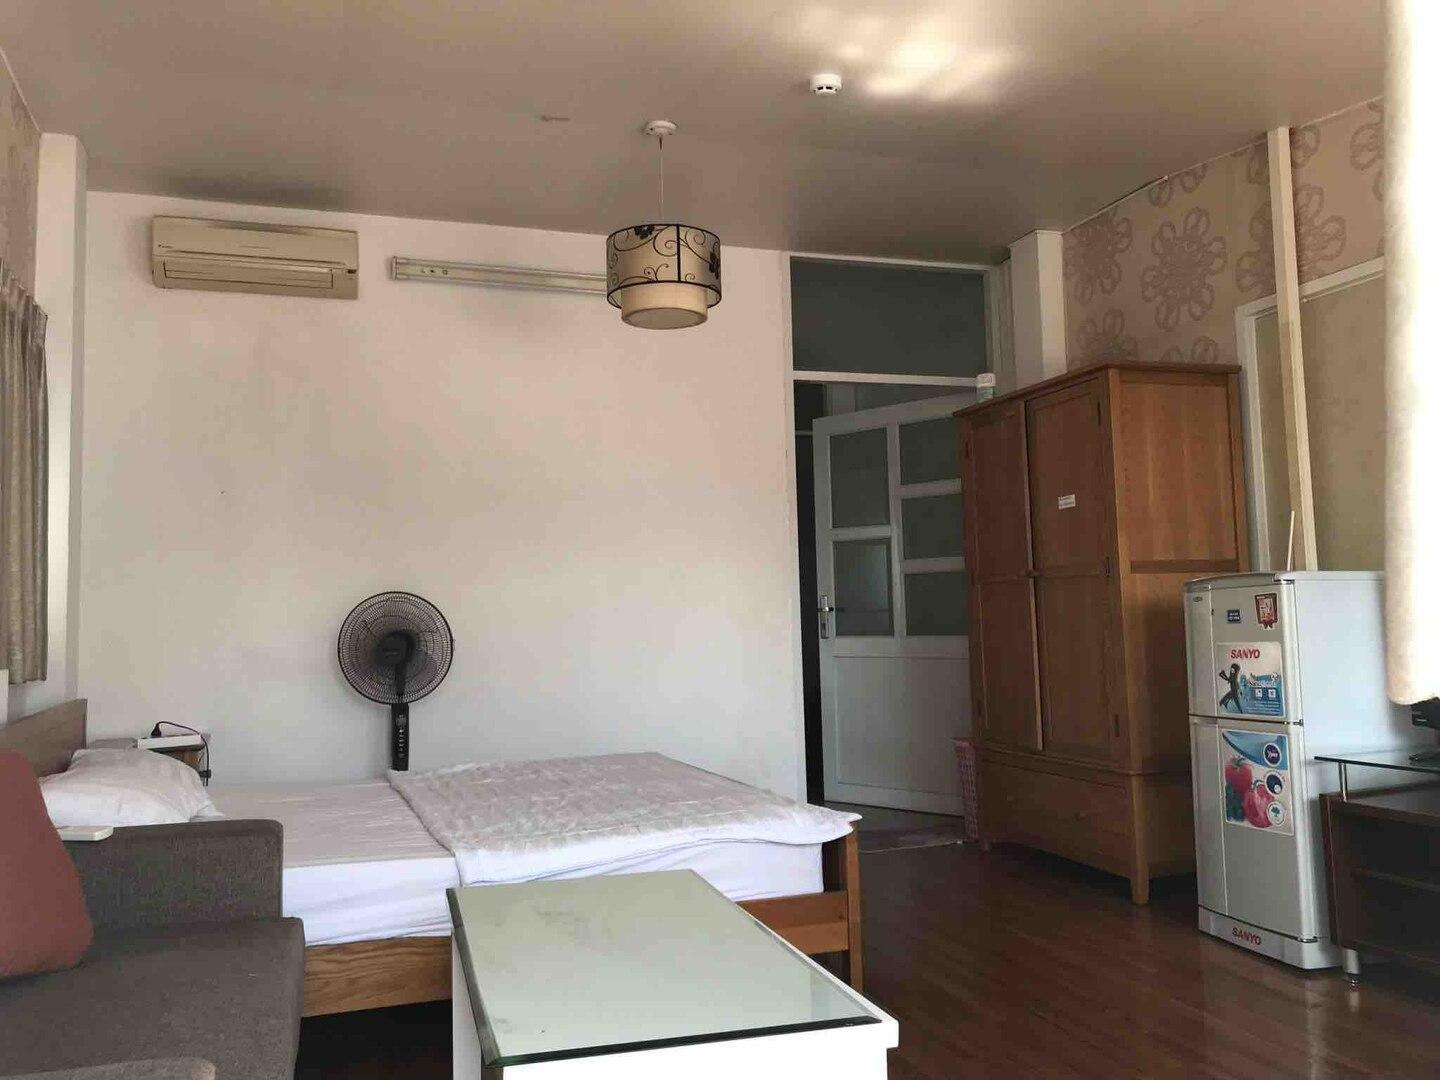 Bedroom 2, Serviced apartment with balcony, Quận 1